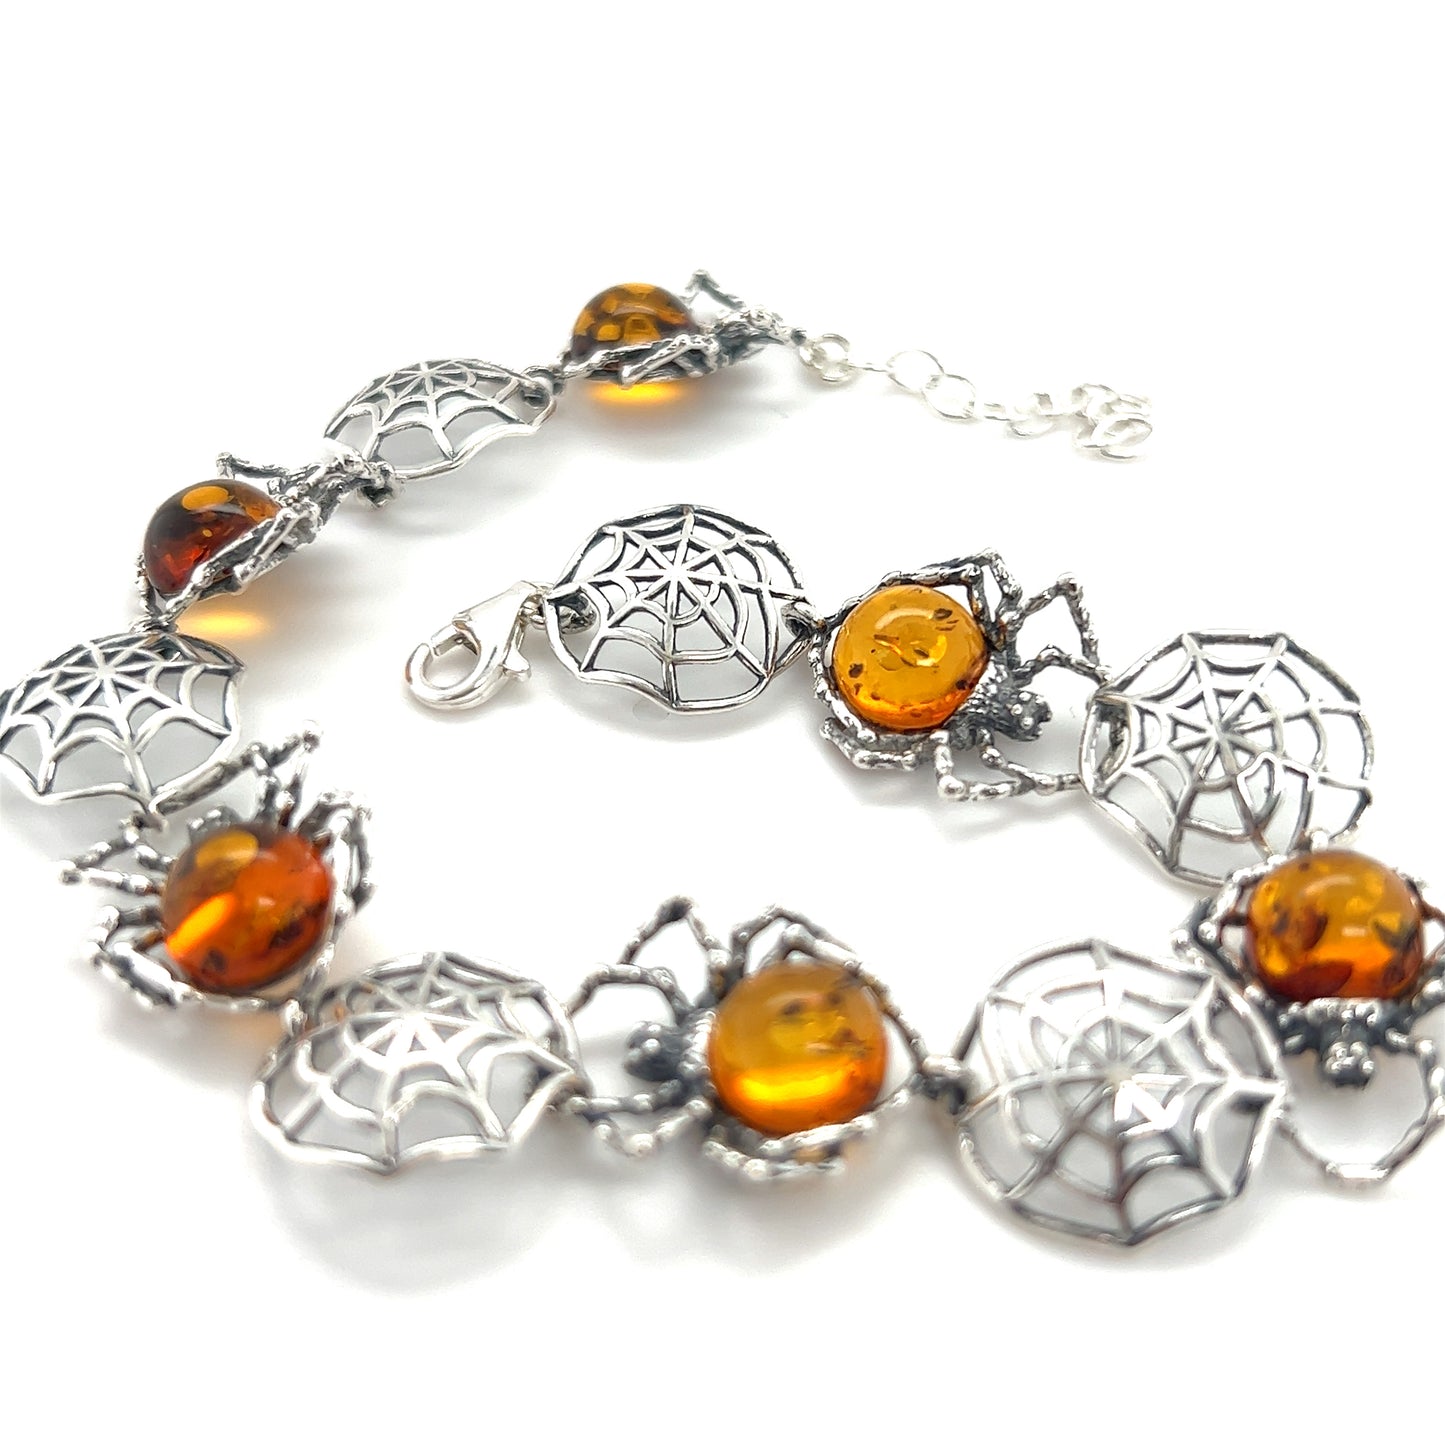 
                  
                    A stunning Spellbinding Amber Spider Bracelet adorned with Super Silver silverwork details and accented with amber beads.
                  
                